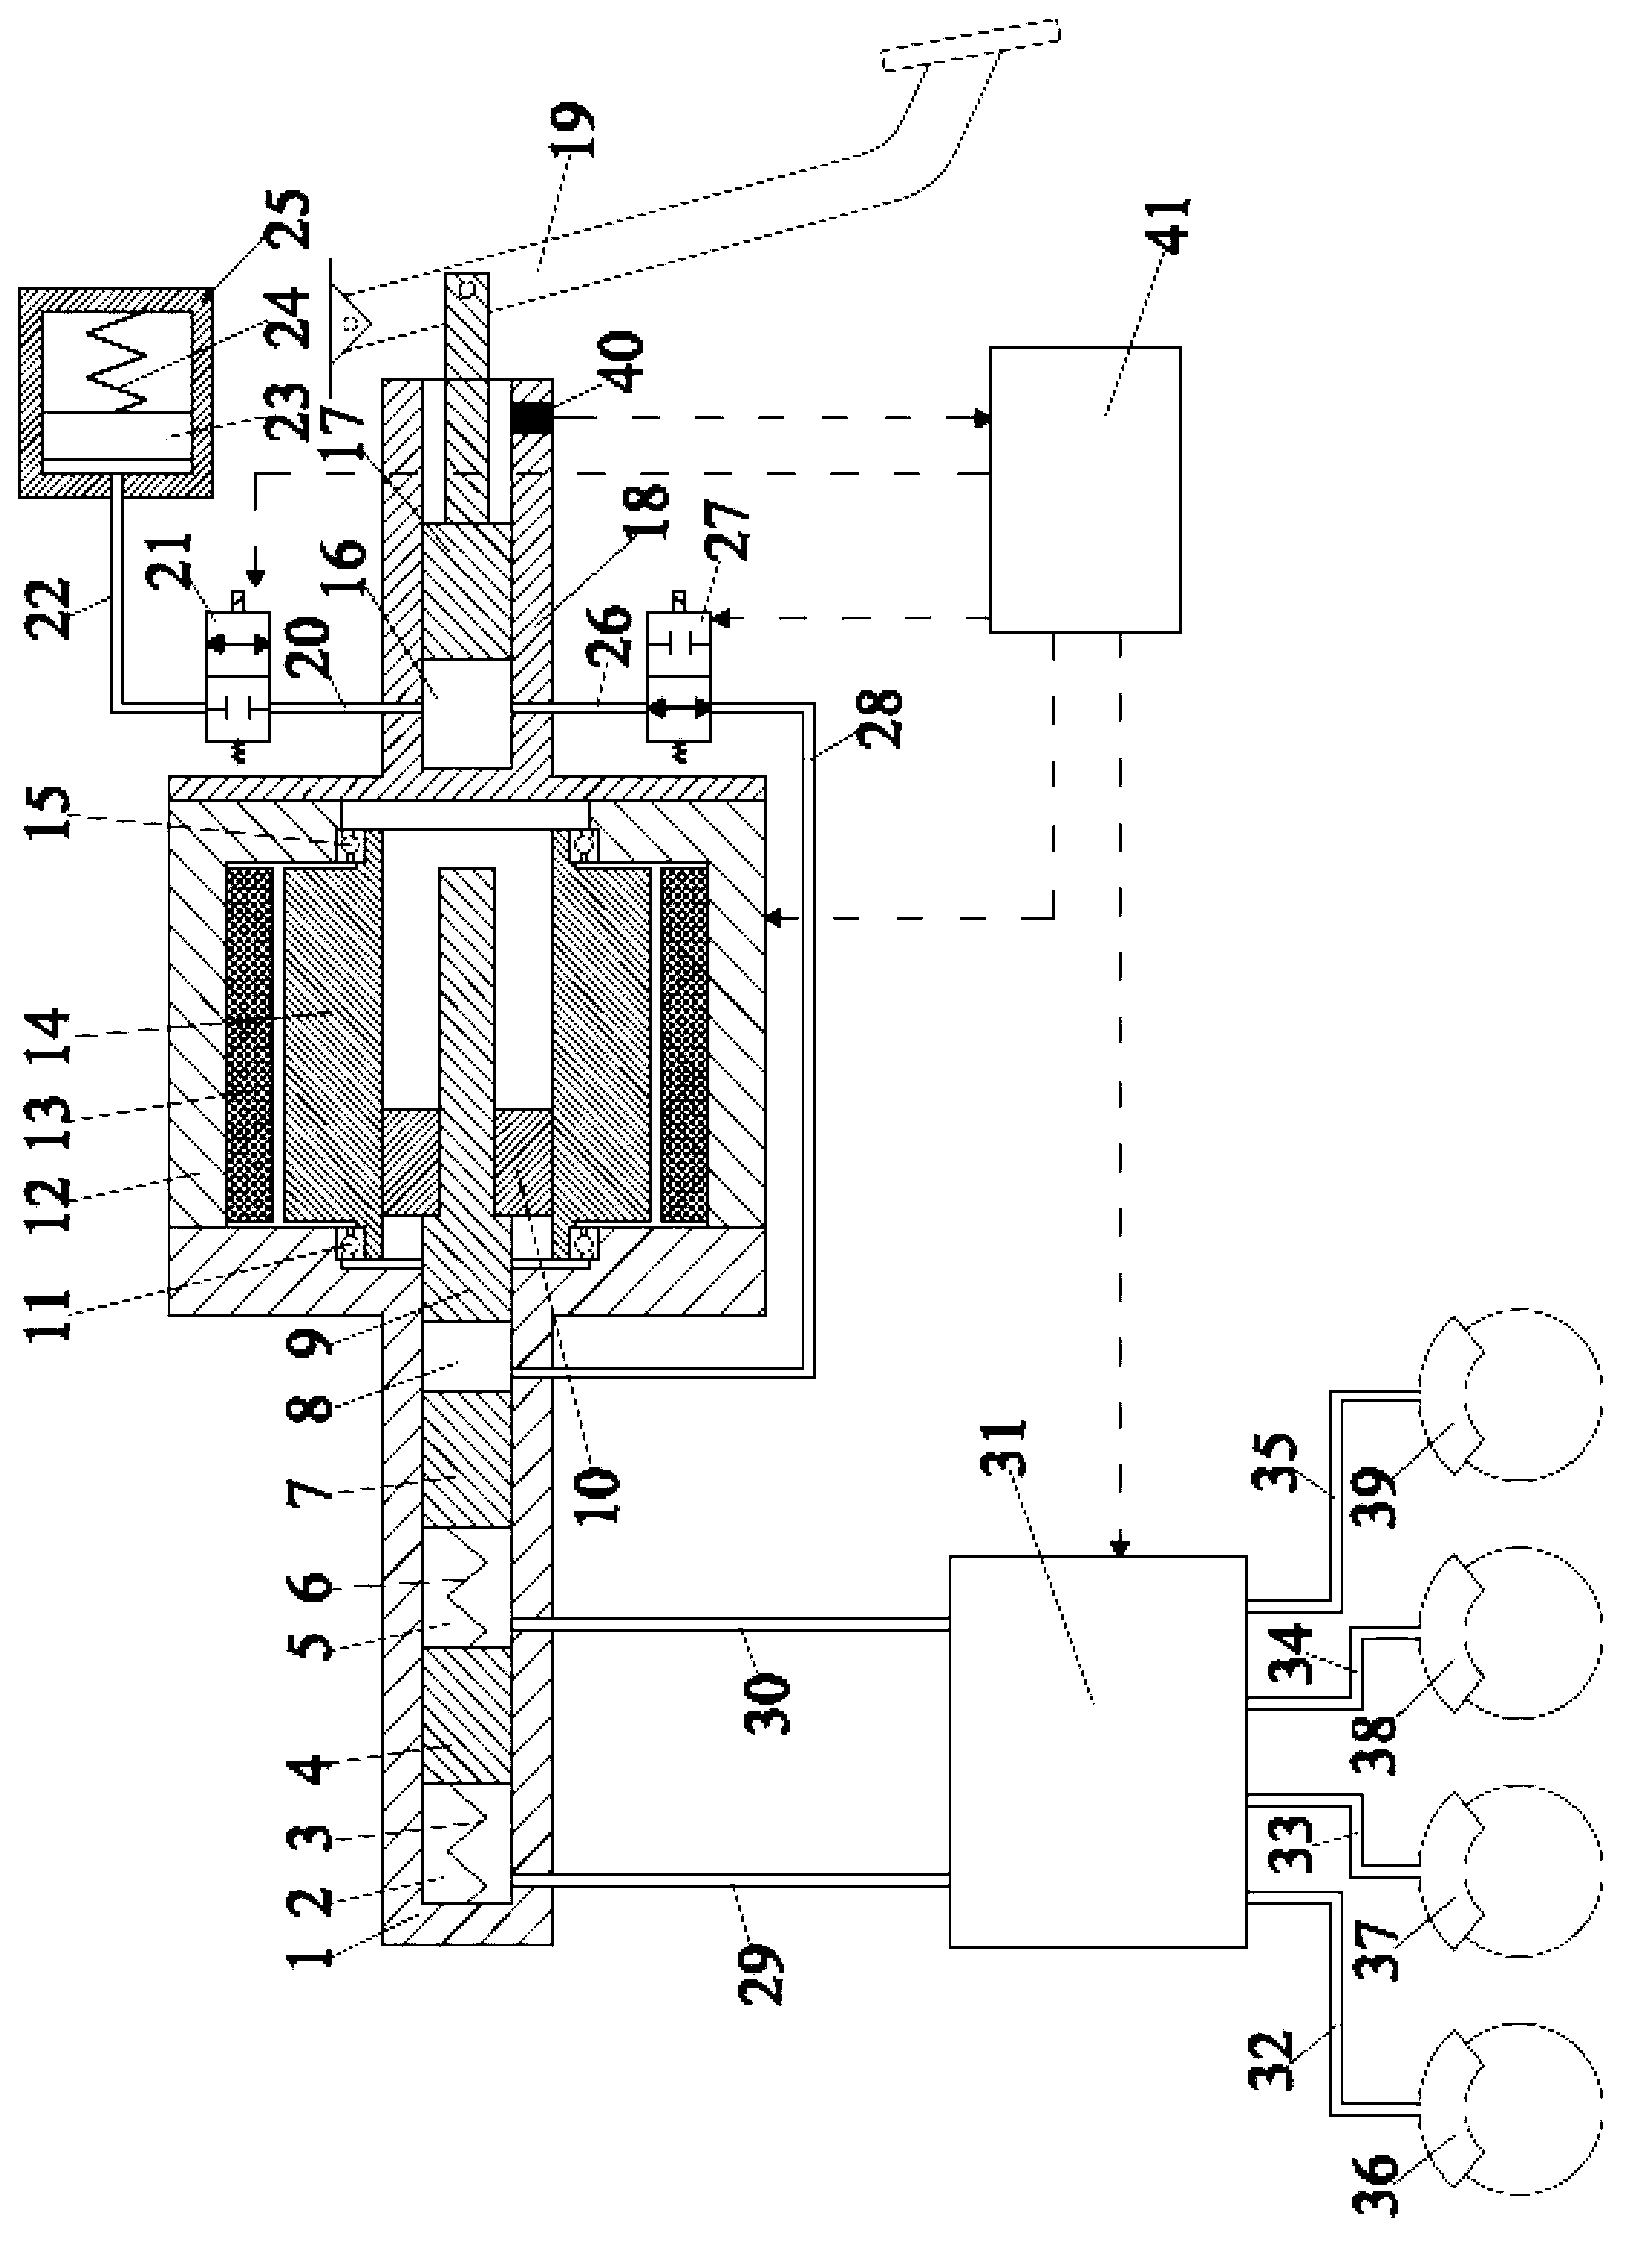 Brake-by-wire system of automobile